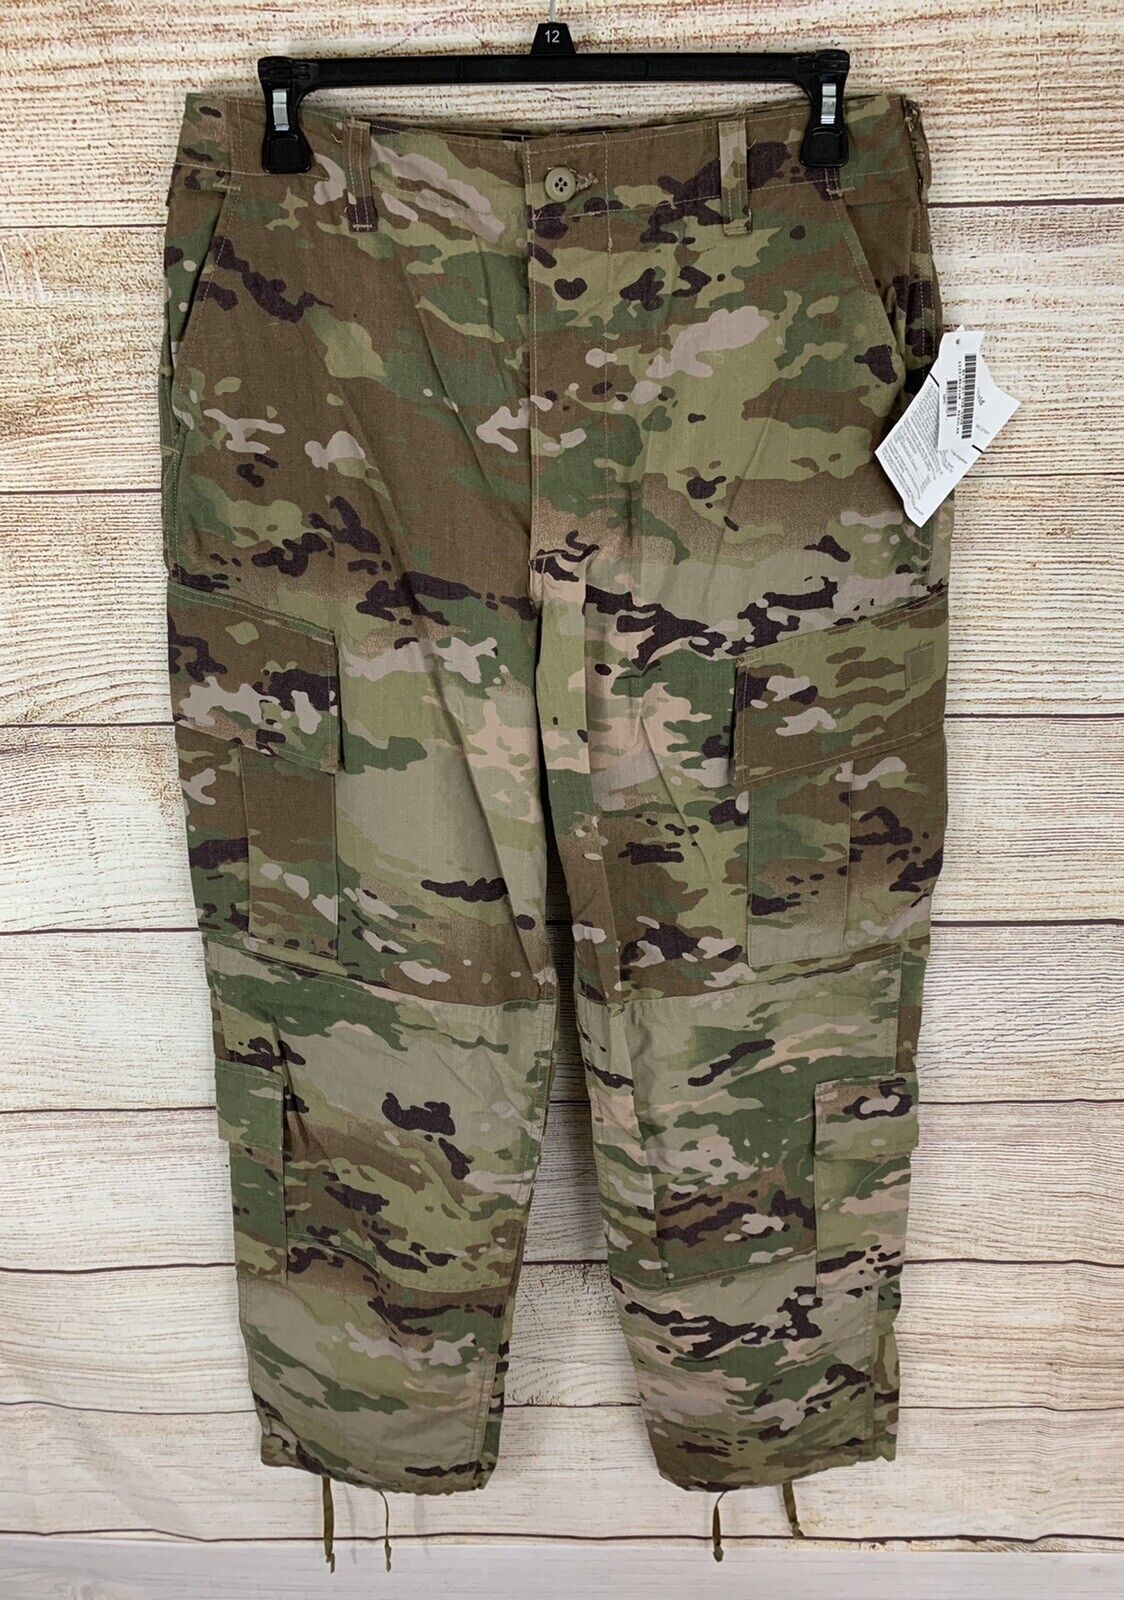 US Army ACU Pants Flame Uniform Product Shield Insect Trouser SEAL limited product Resistant